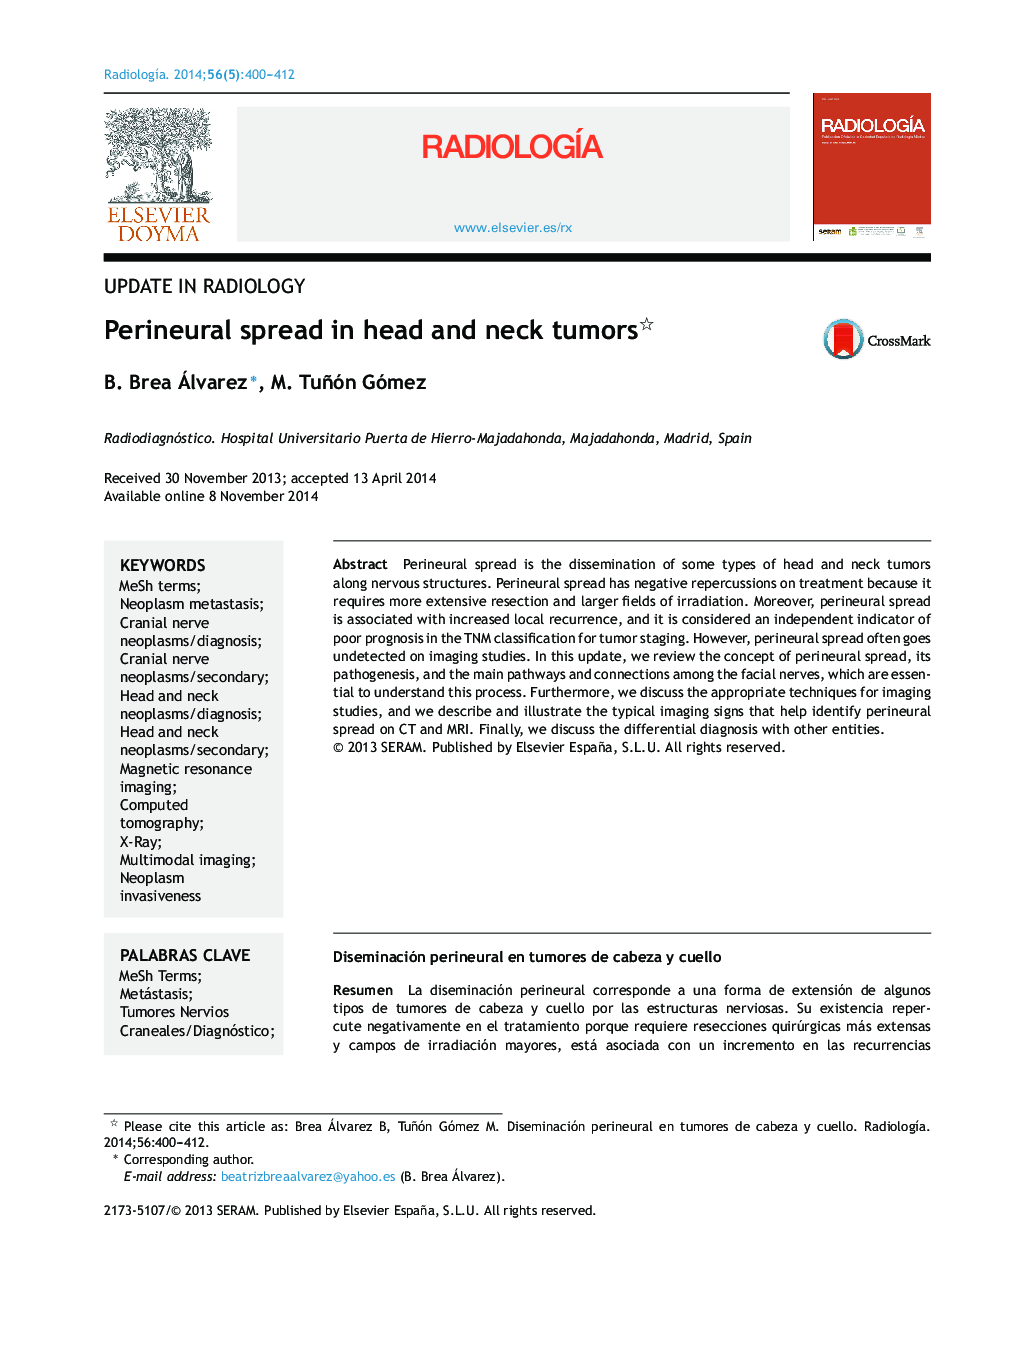 Perineural spread in head and neck tumors